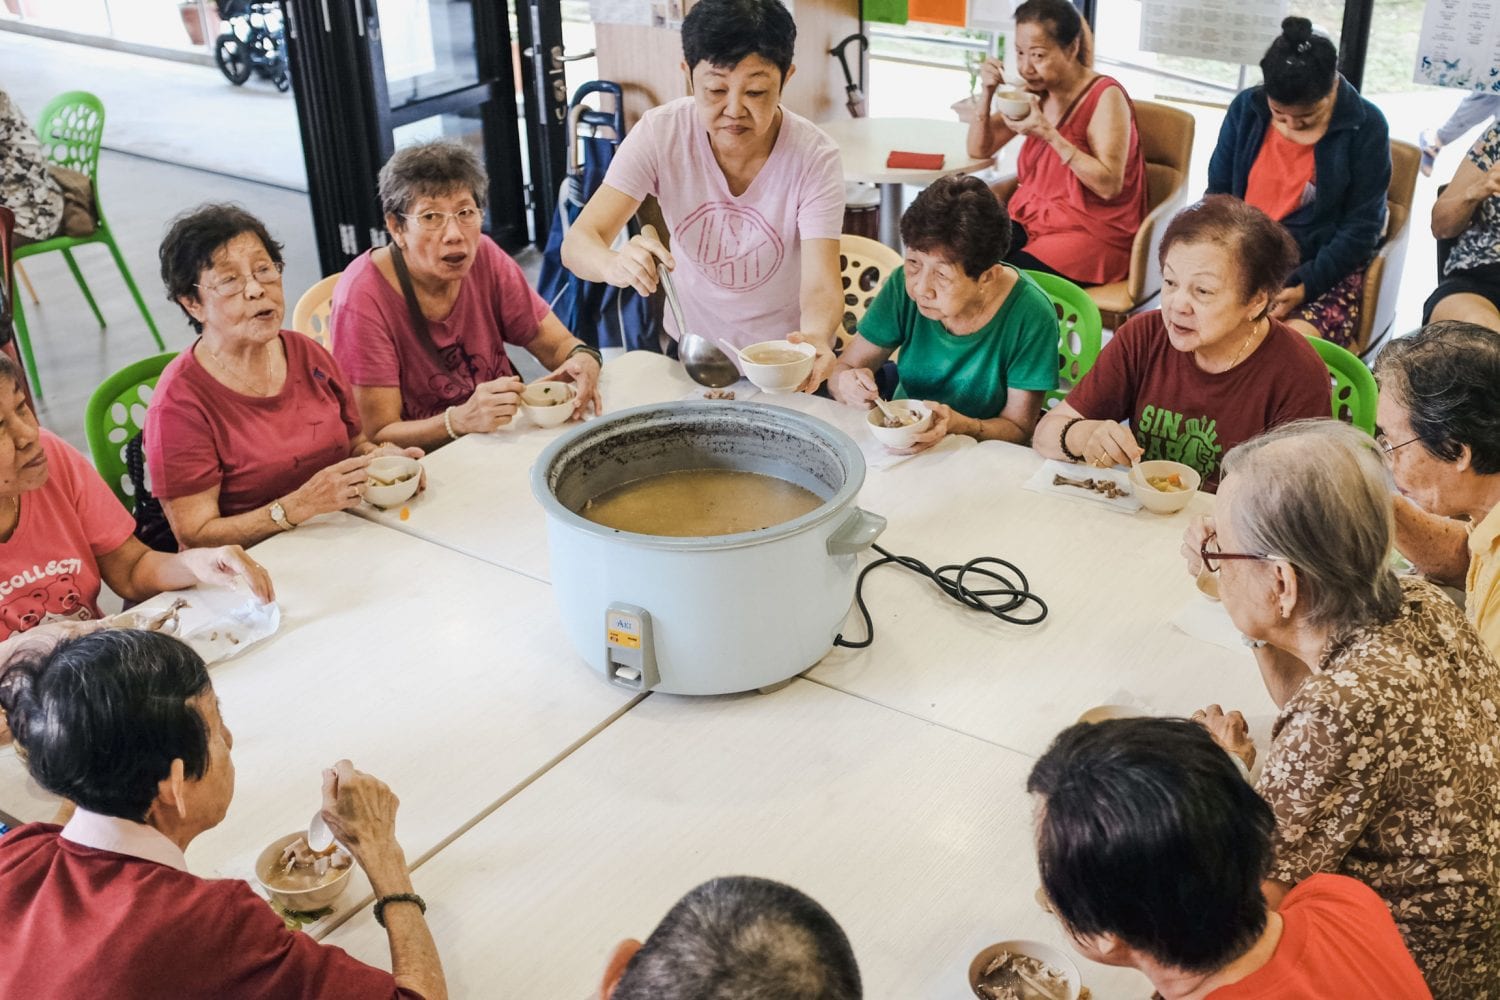 old women sitting around a table with a pot of soup in the middle